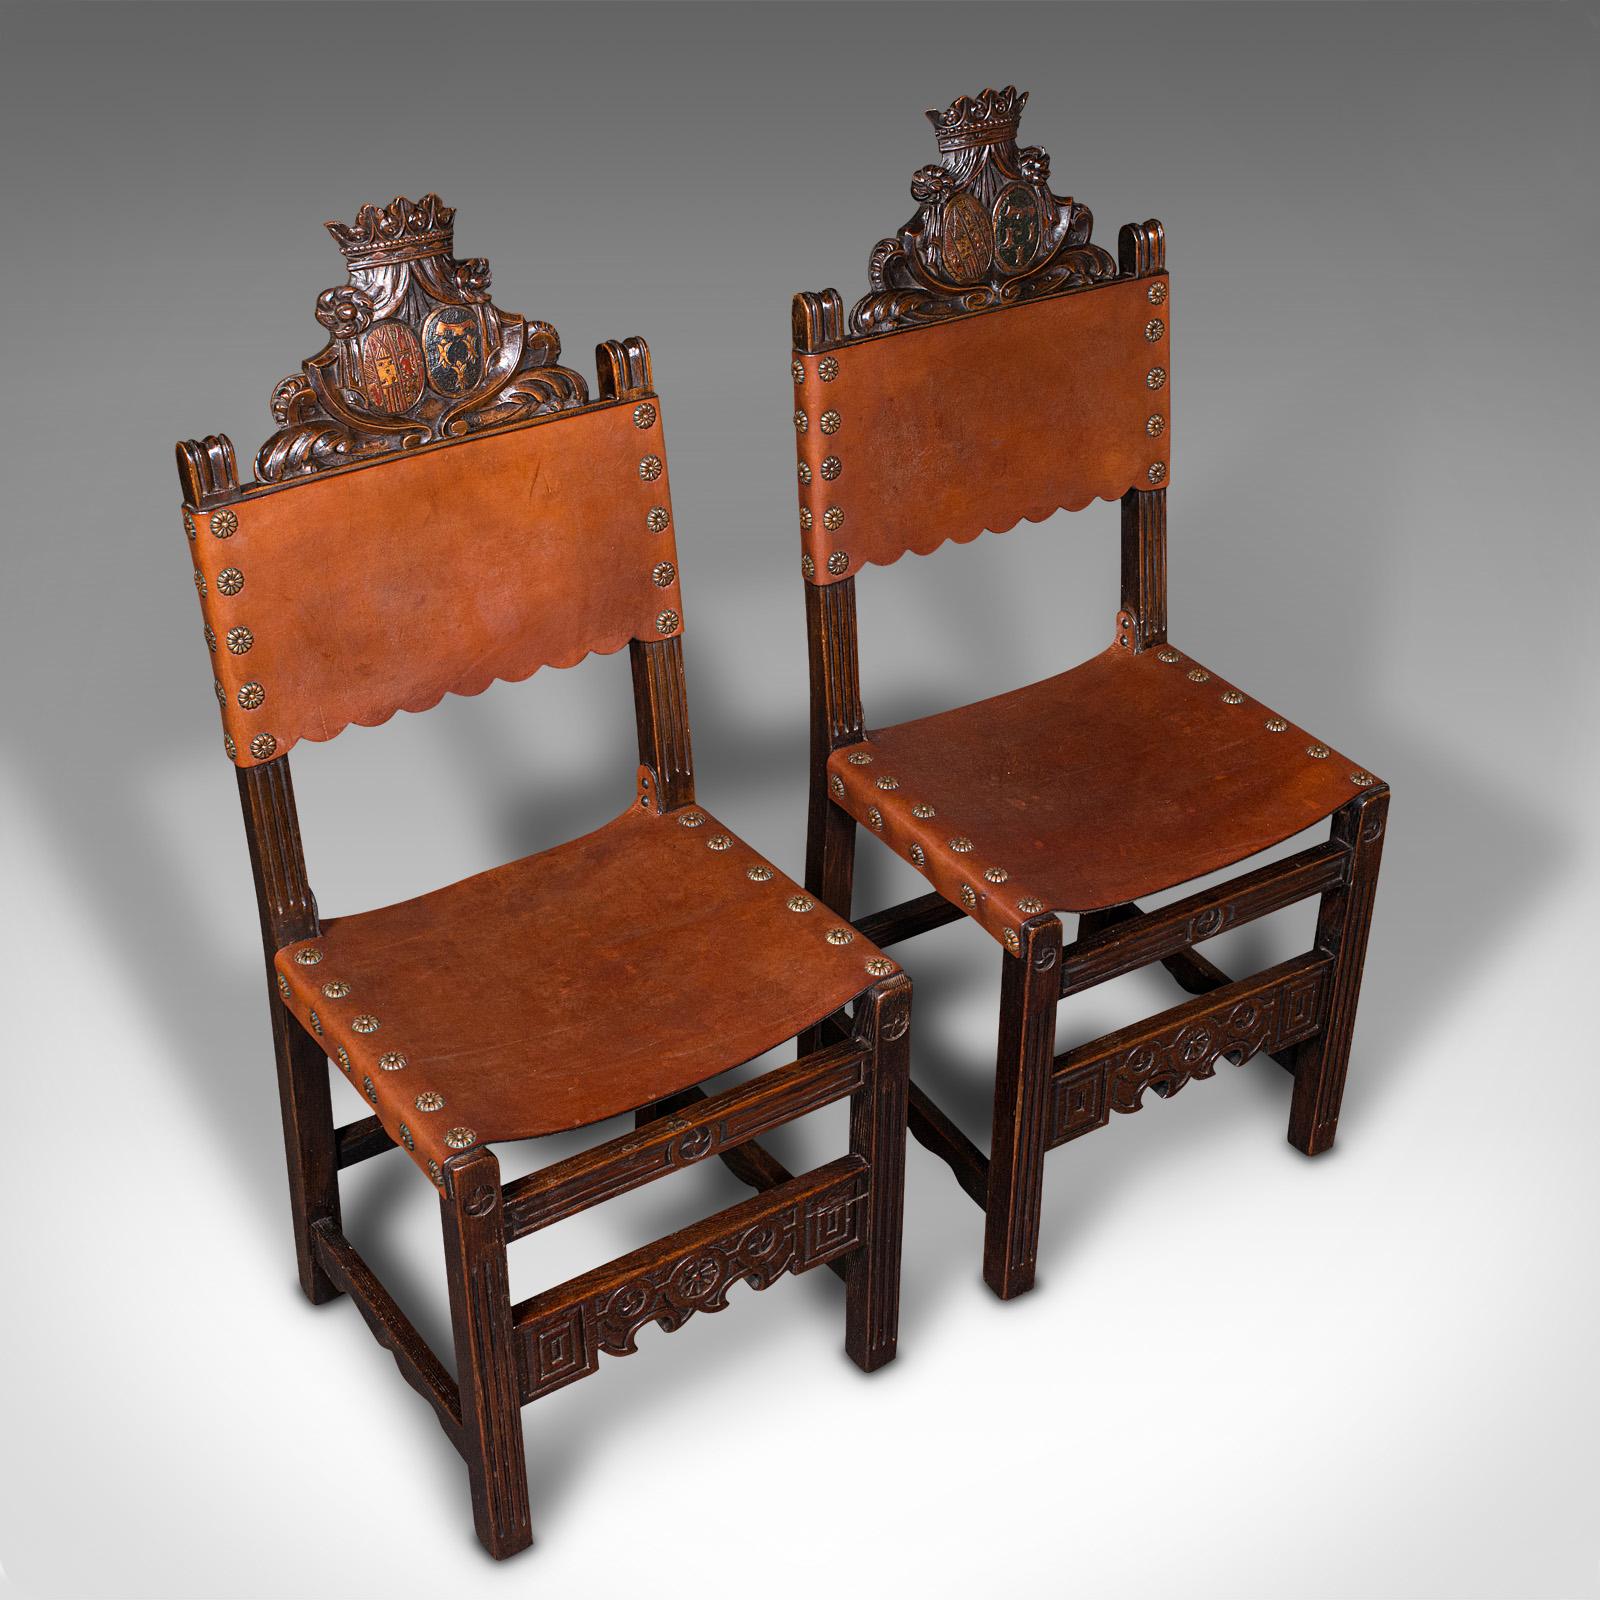 Pair of Antique Hall Seats, Scottish, Side Chair, Jacobean Revival, Edwardian 1